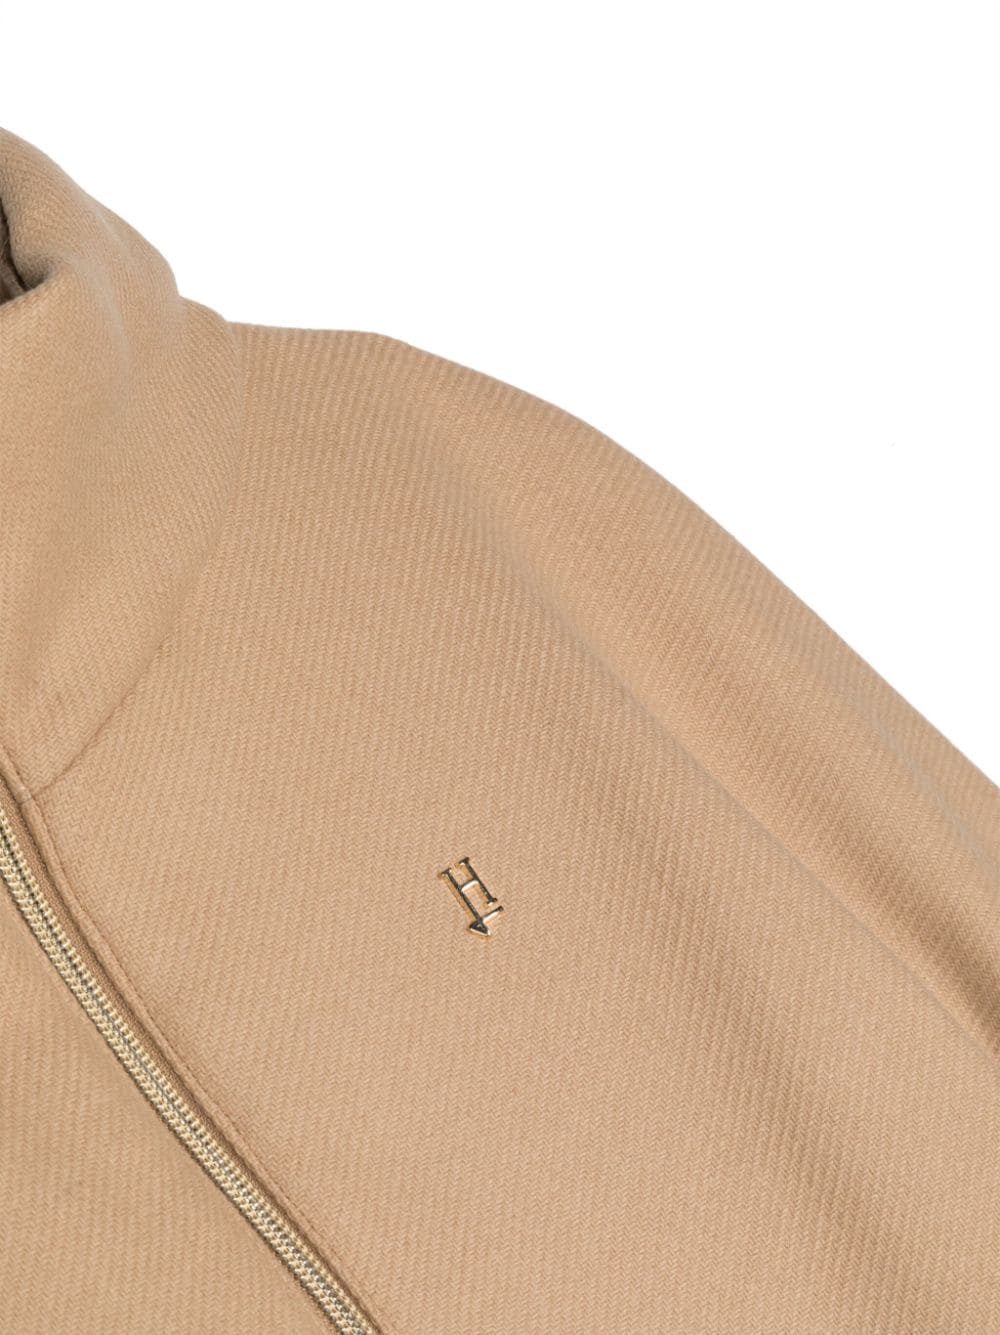 Shop Herno Layered Padded Coat In Neutrals